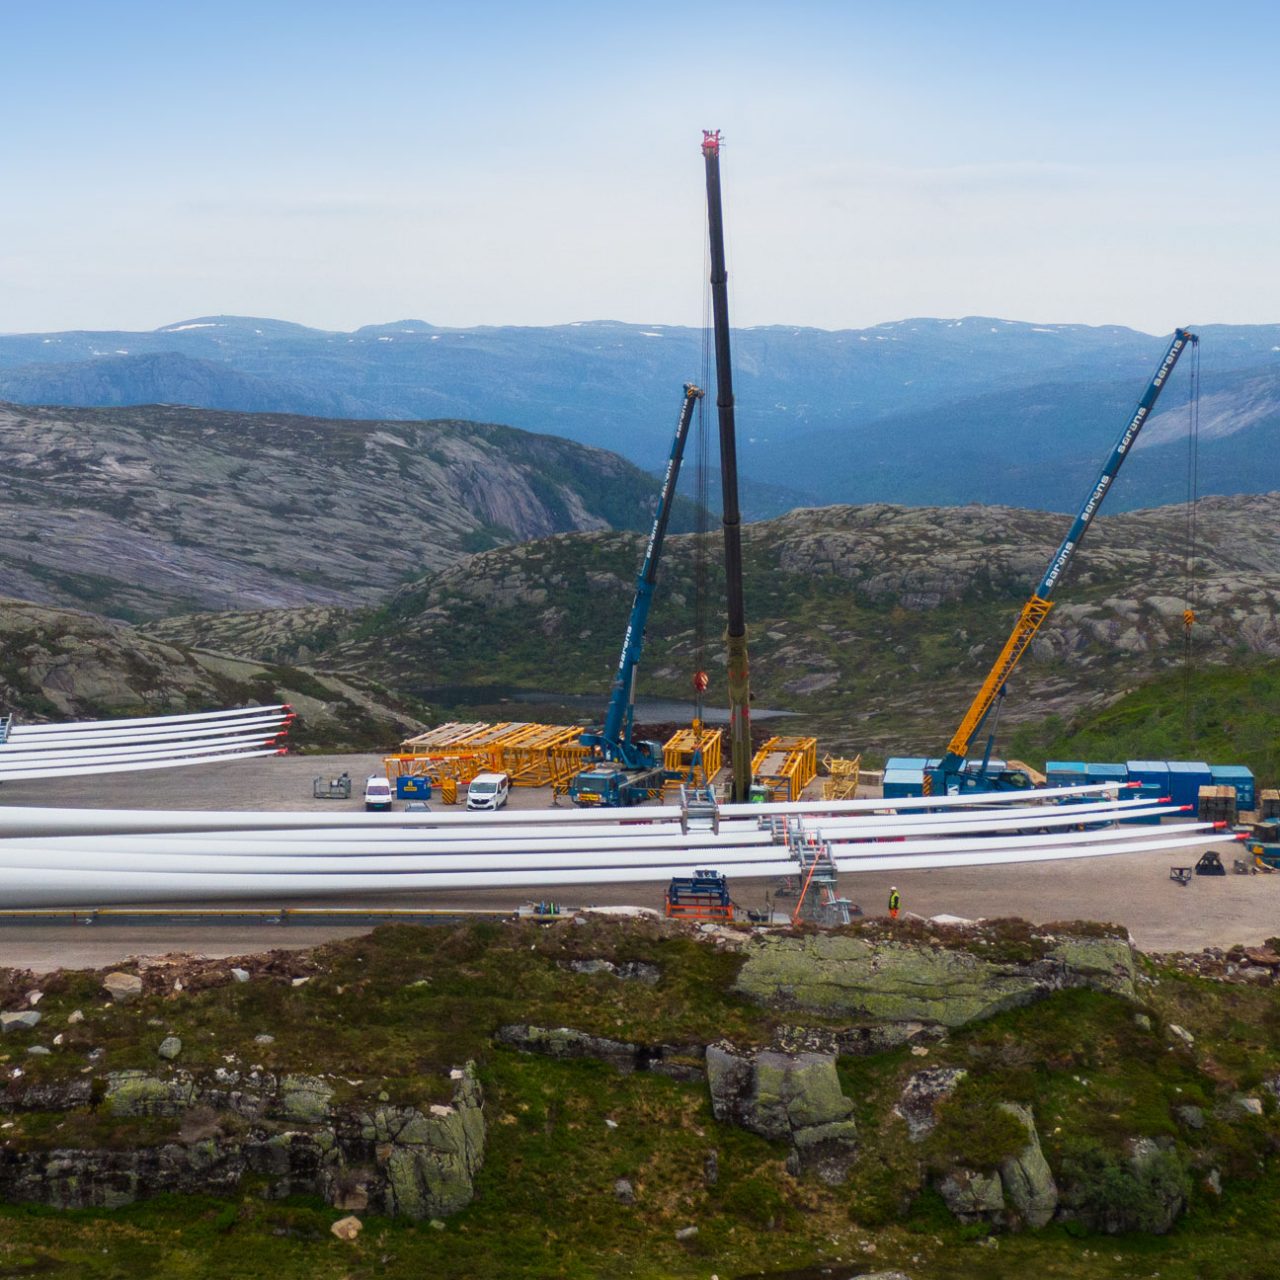 Wind turbine blades lined up on ground with cranes and hills in background